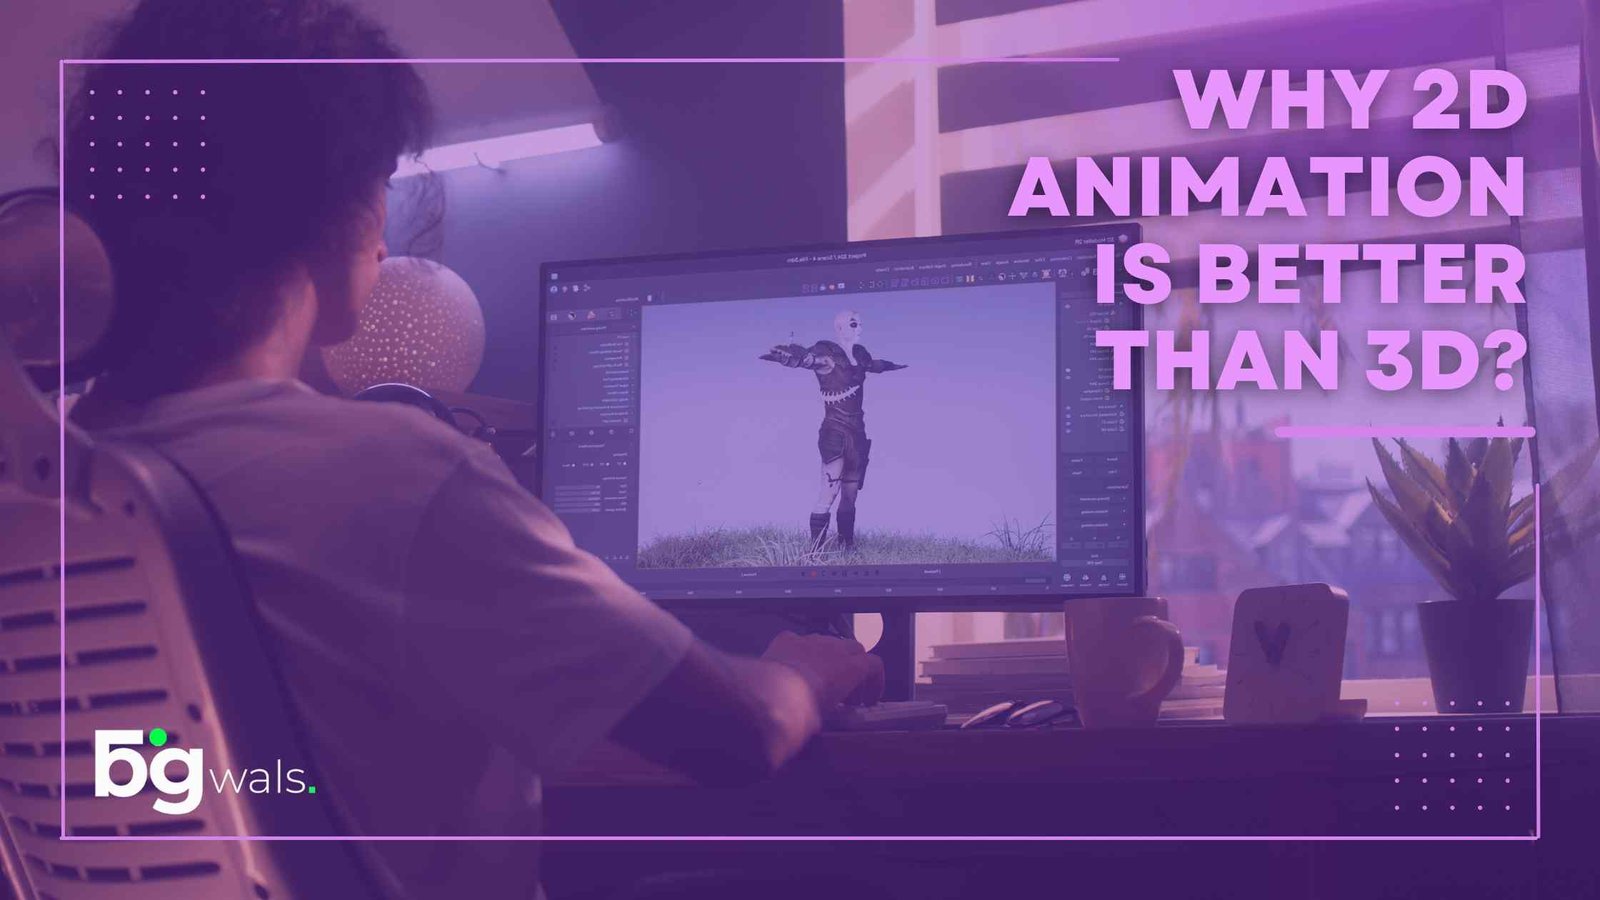 Why 2D Animation Is Better Than 3D?